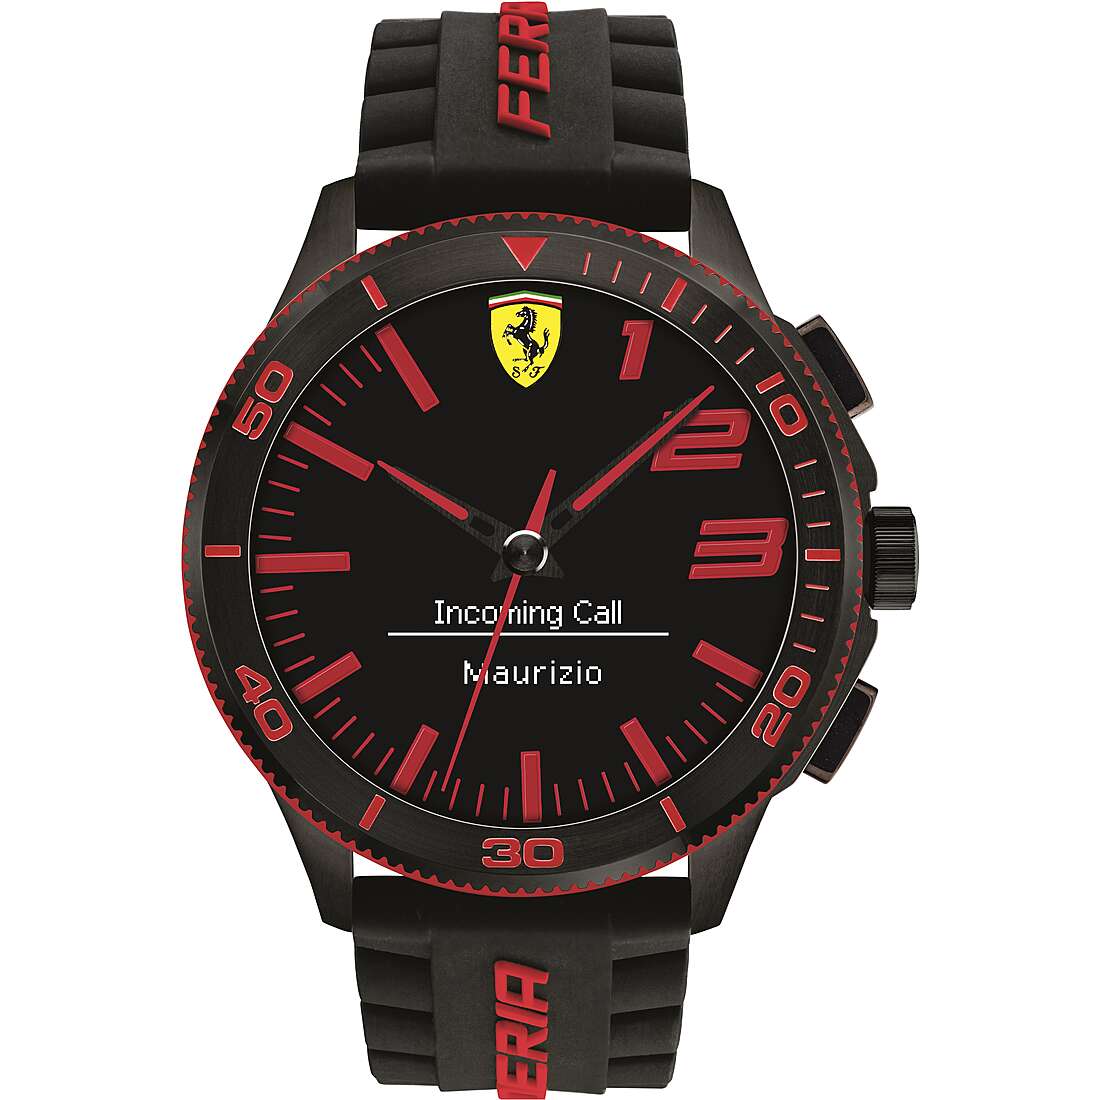 Much-awaited Scuderia Ferrari Orologi line of watches unveiled at  BaselWorld - Luxurylaunches